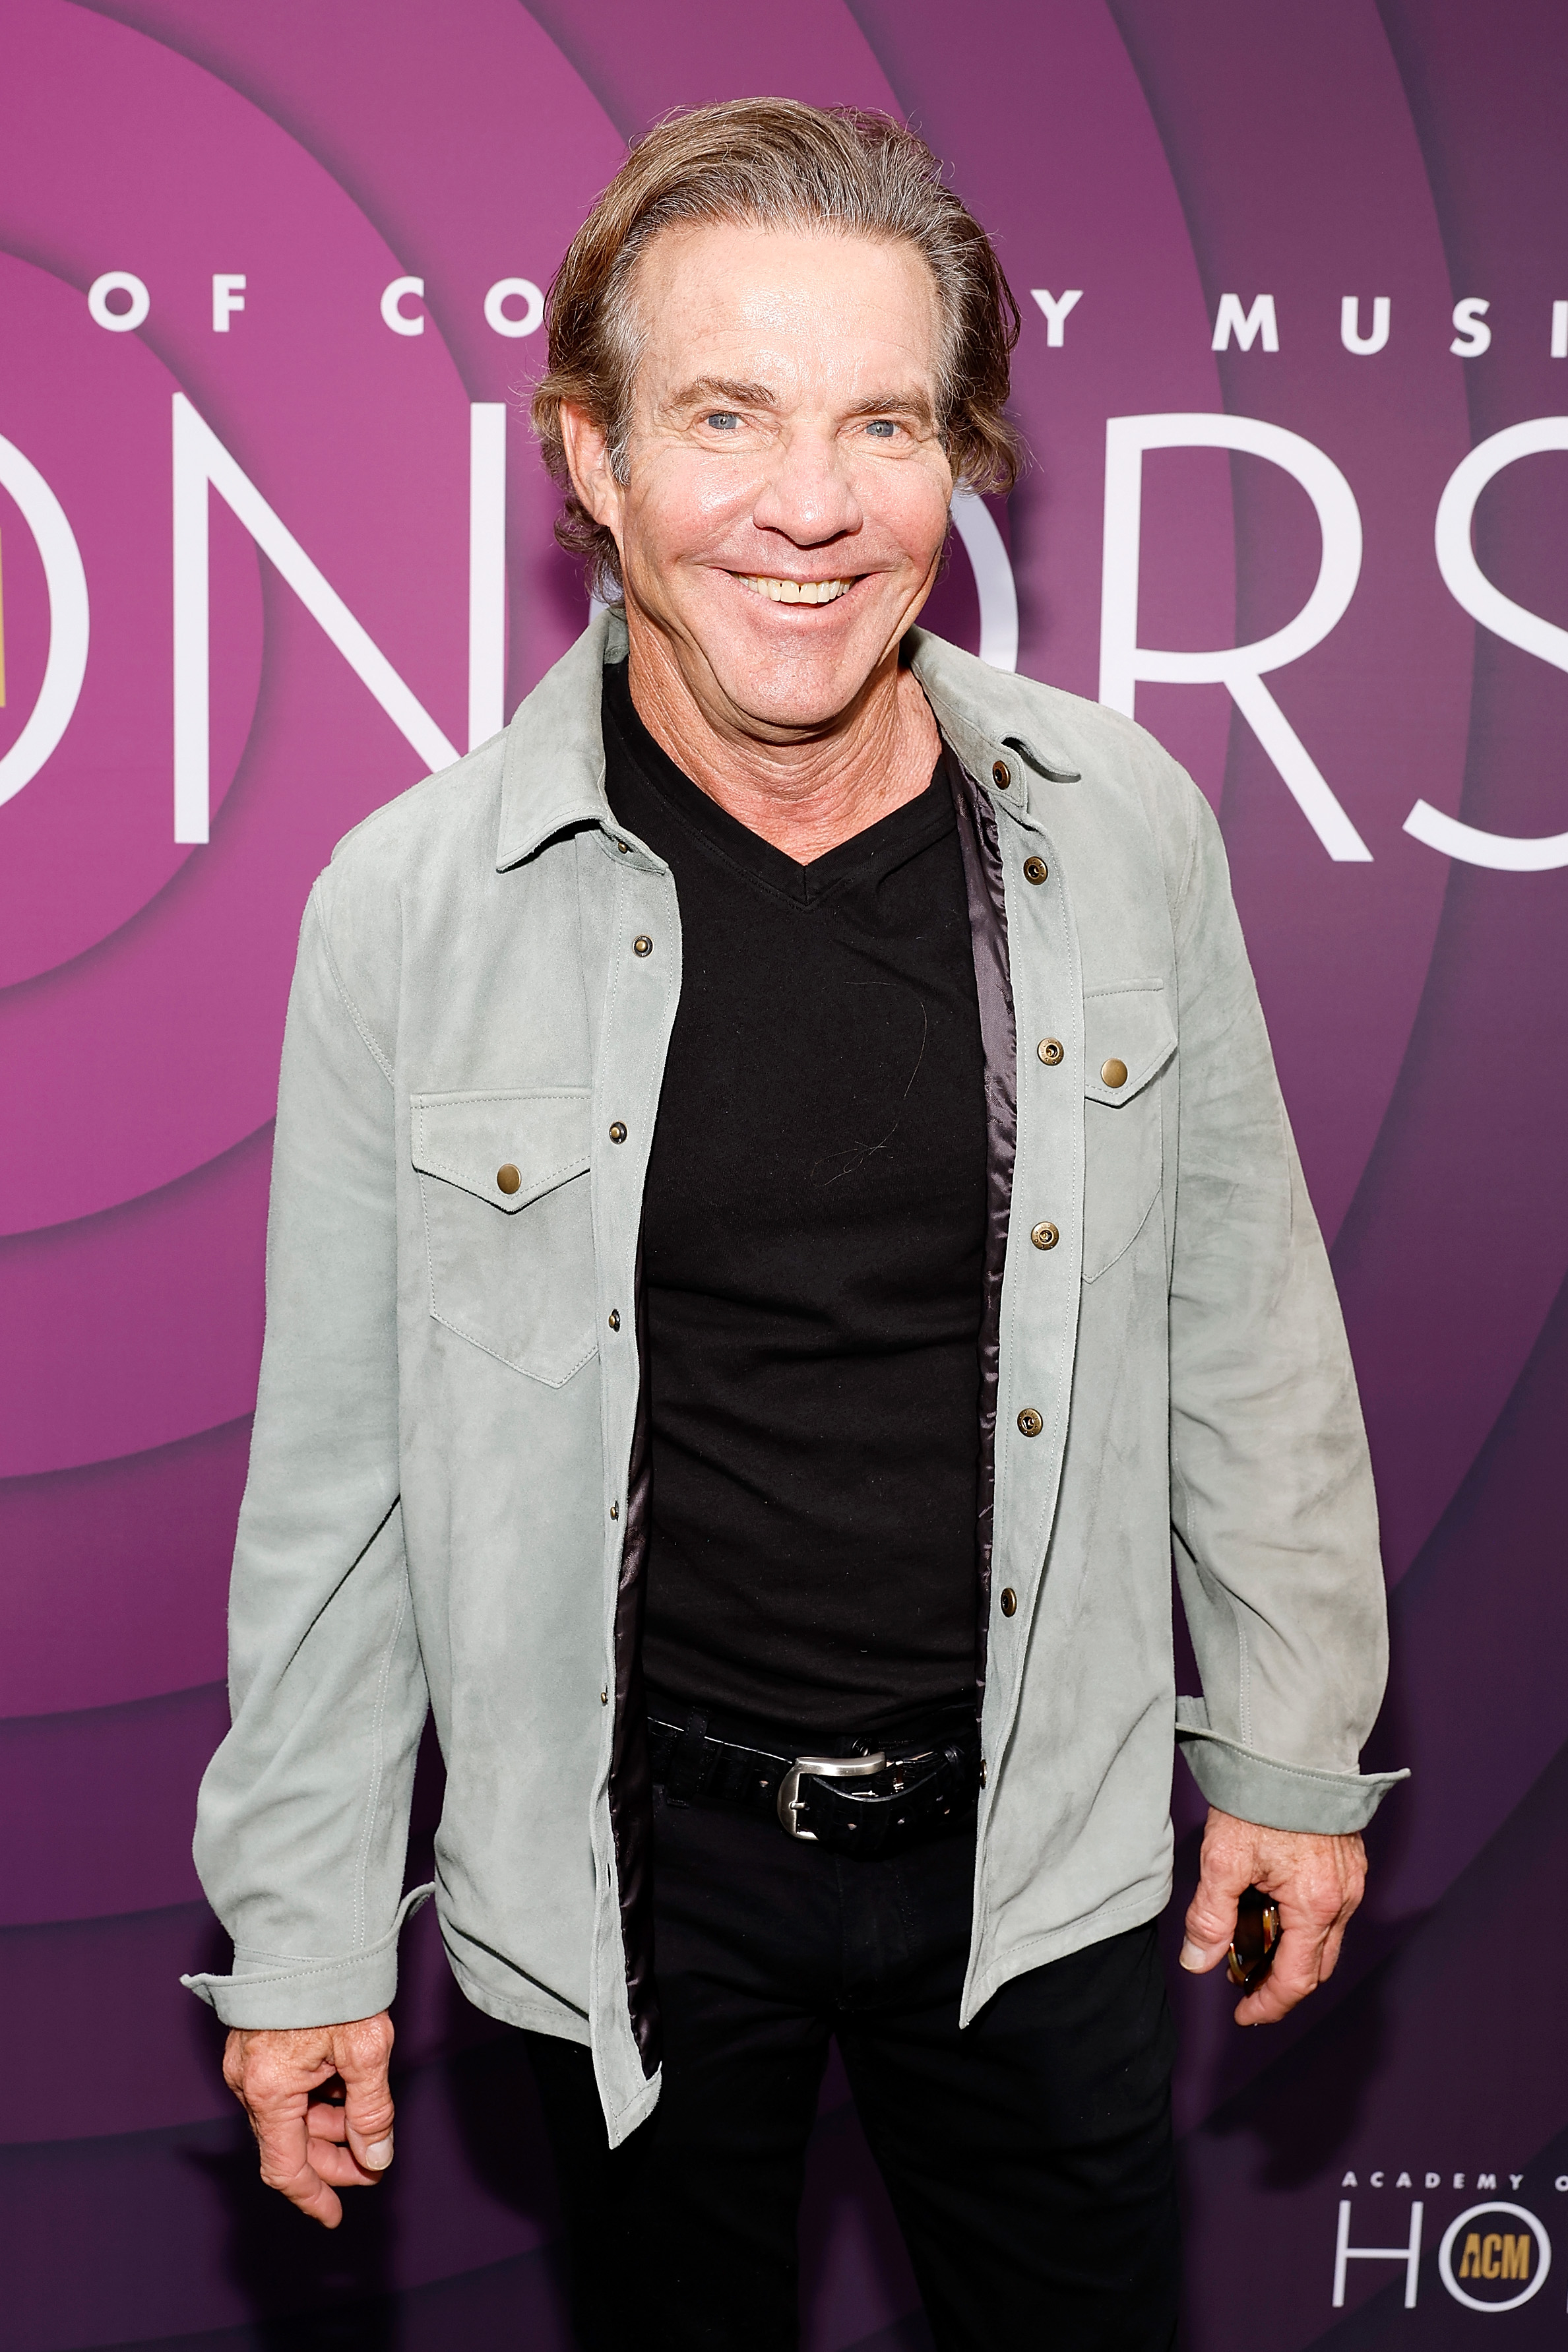 Close-up of Dennis smiling in a denim jacket at a media event